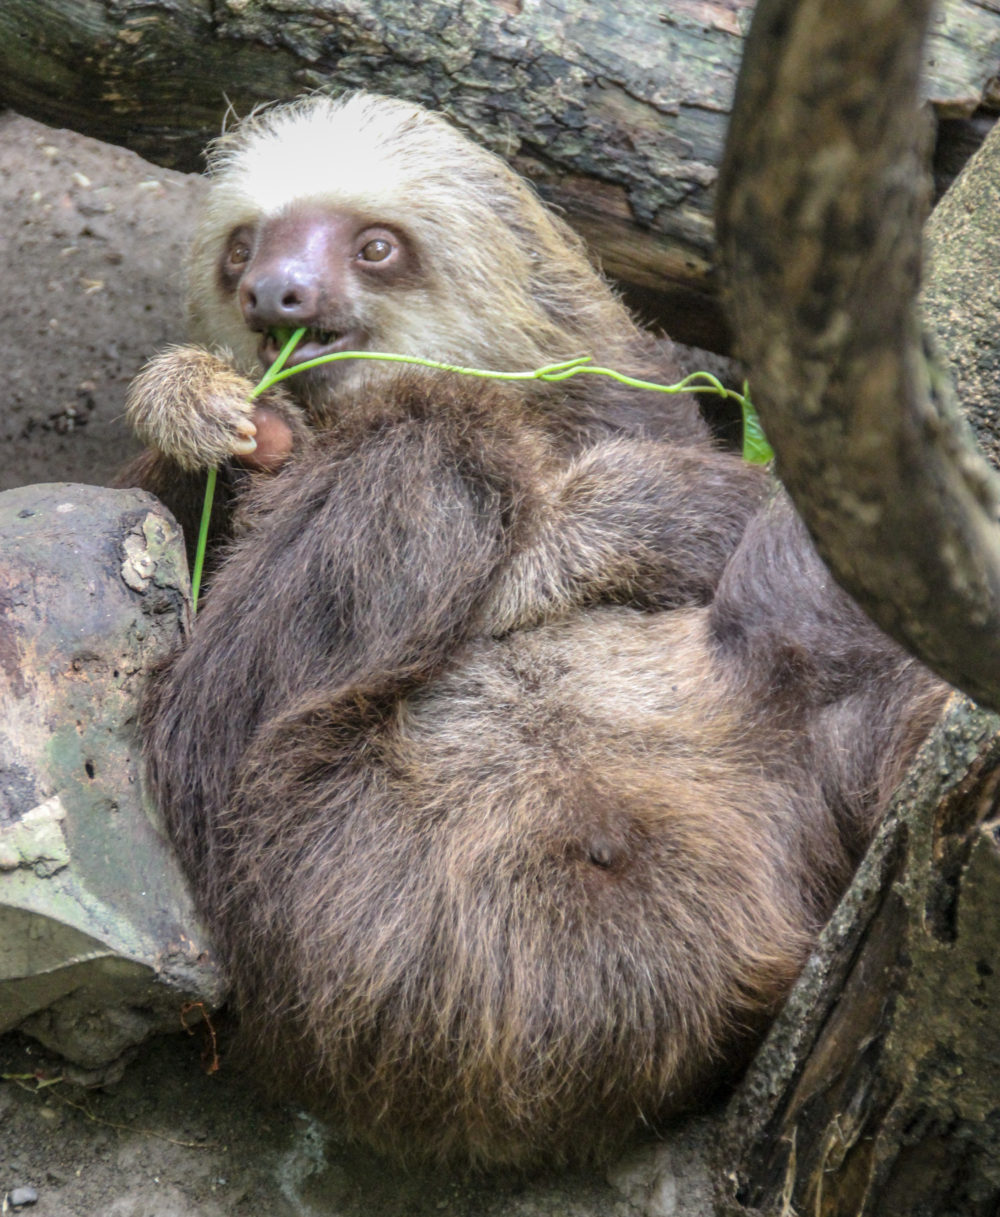 Costa Rica’s Amazing Jaguar Rescue Center Tours with Sloths, Monkeys, Birds & Other Wildlife